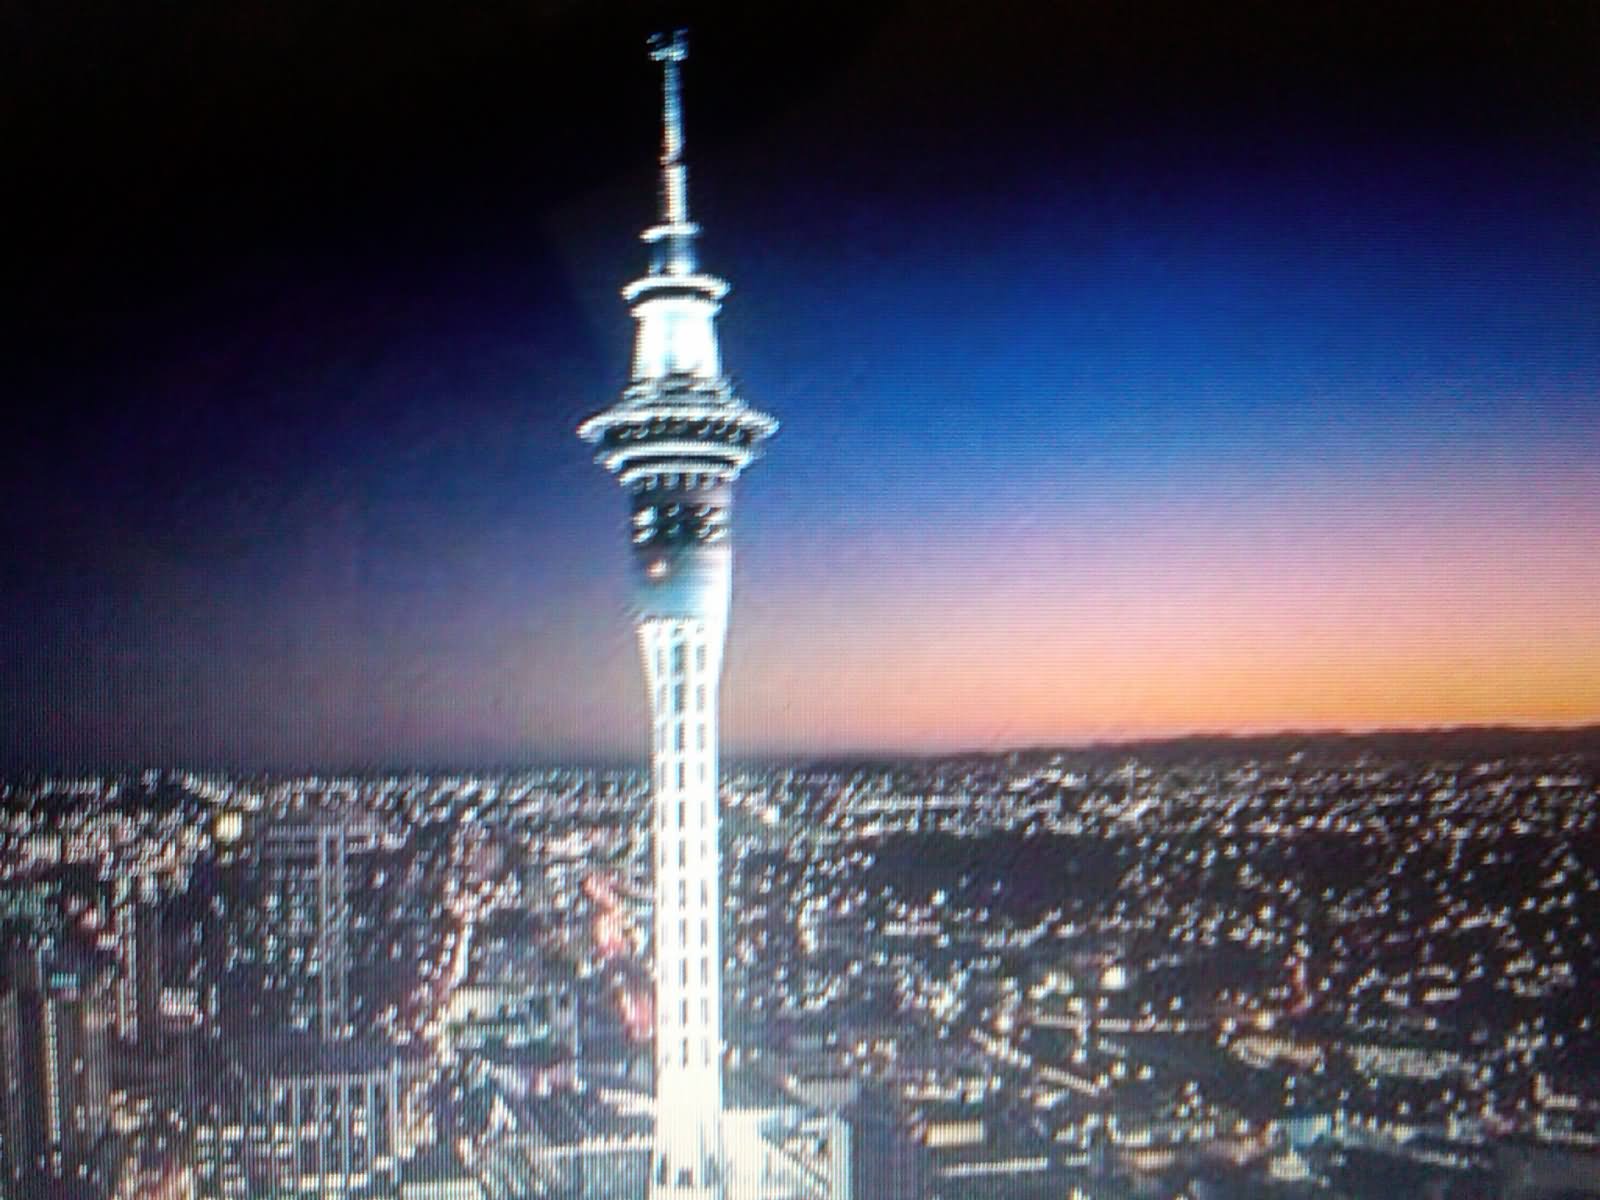 Sky Tower Lit Up At Night